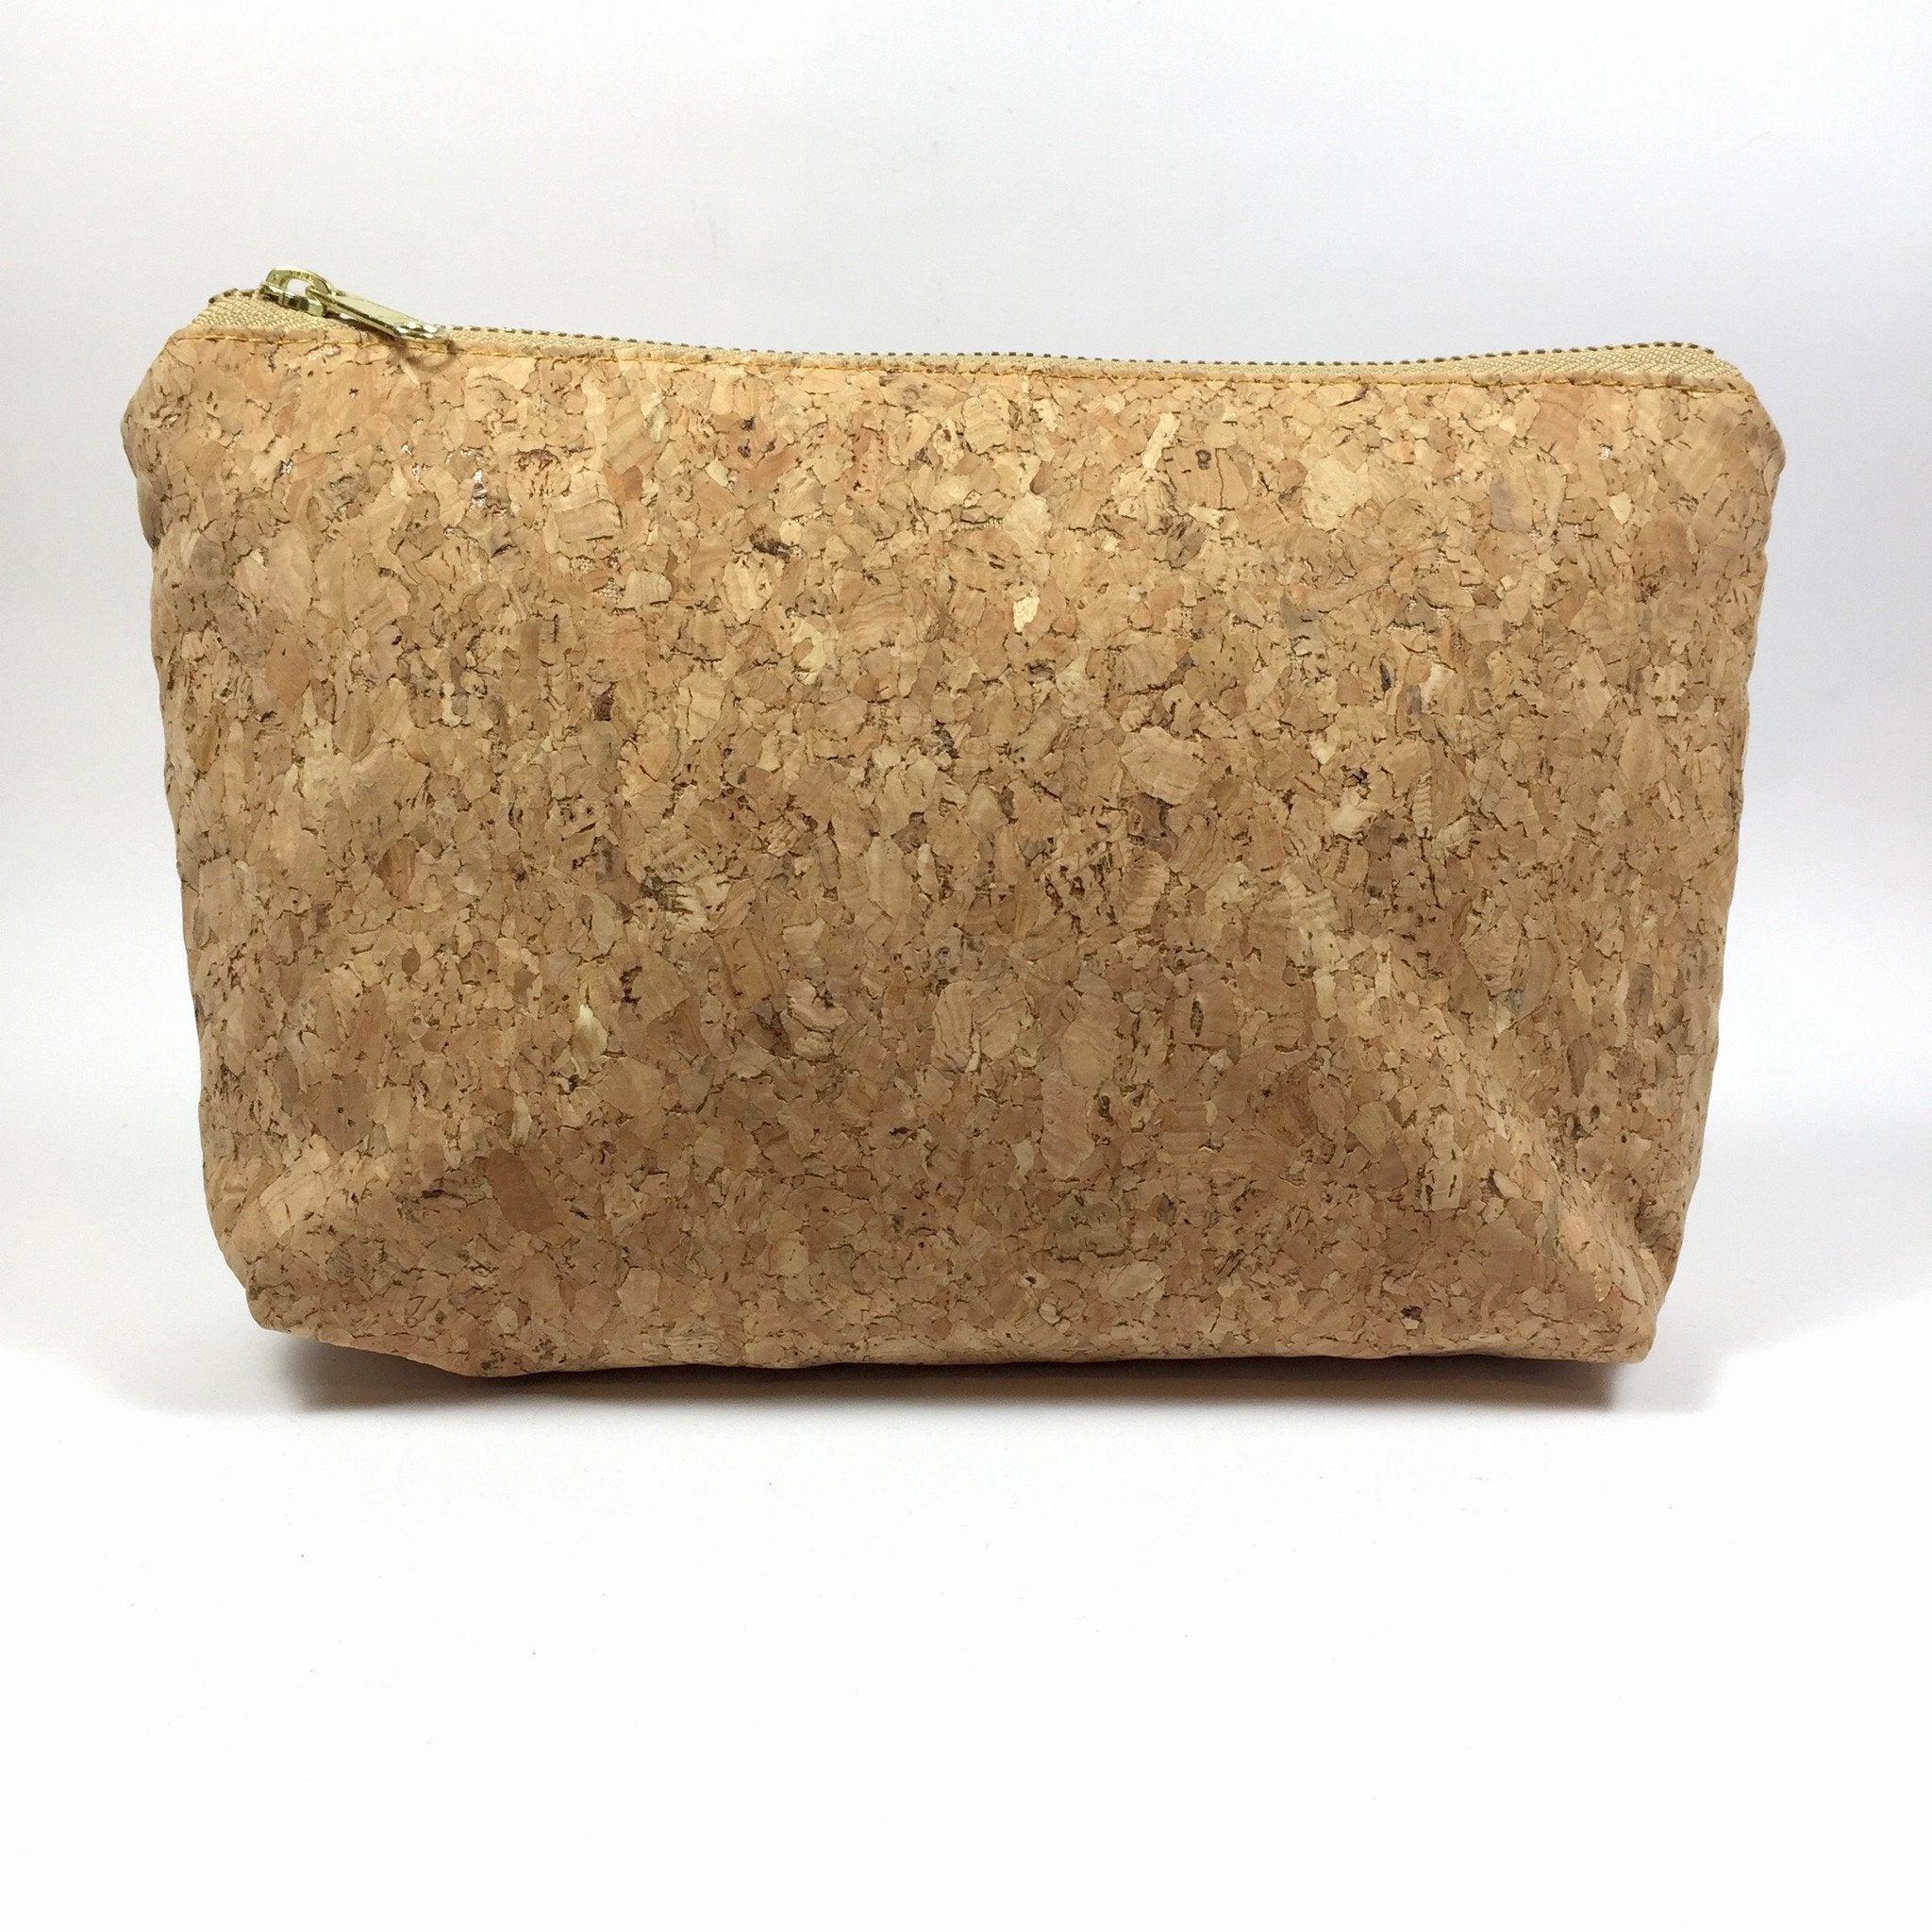 Miley Cork Pouch in Classic